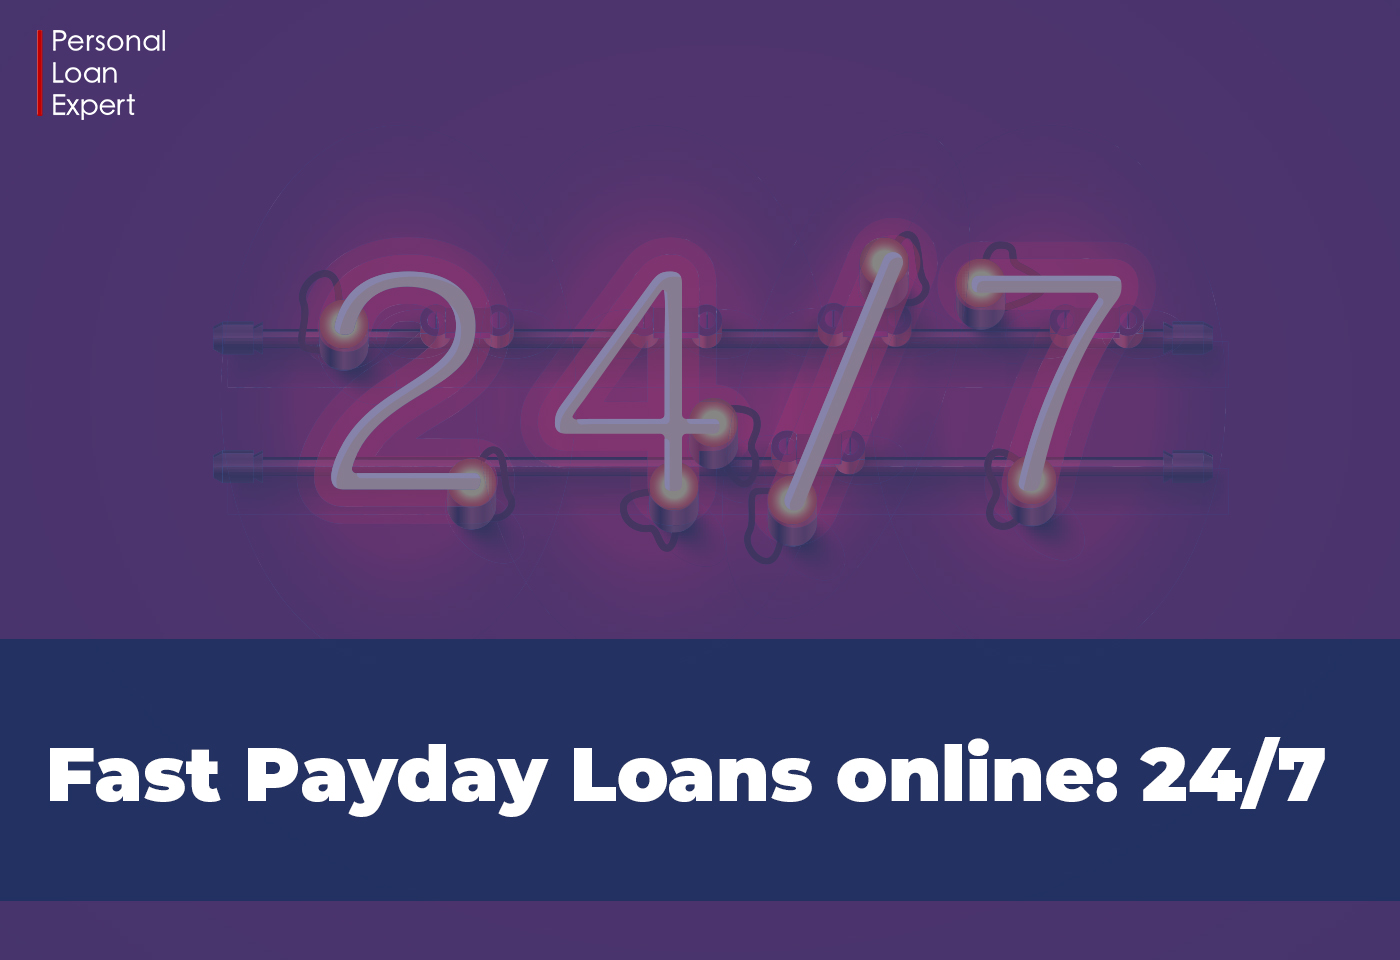 Fast Payday Loans Online: 24/7 